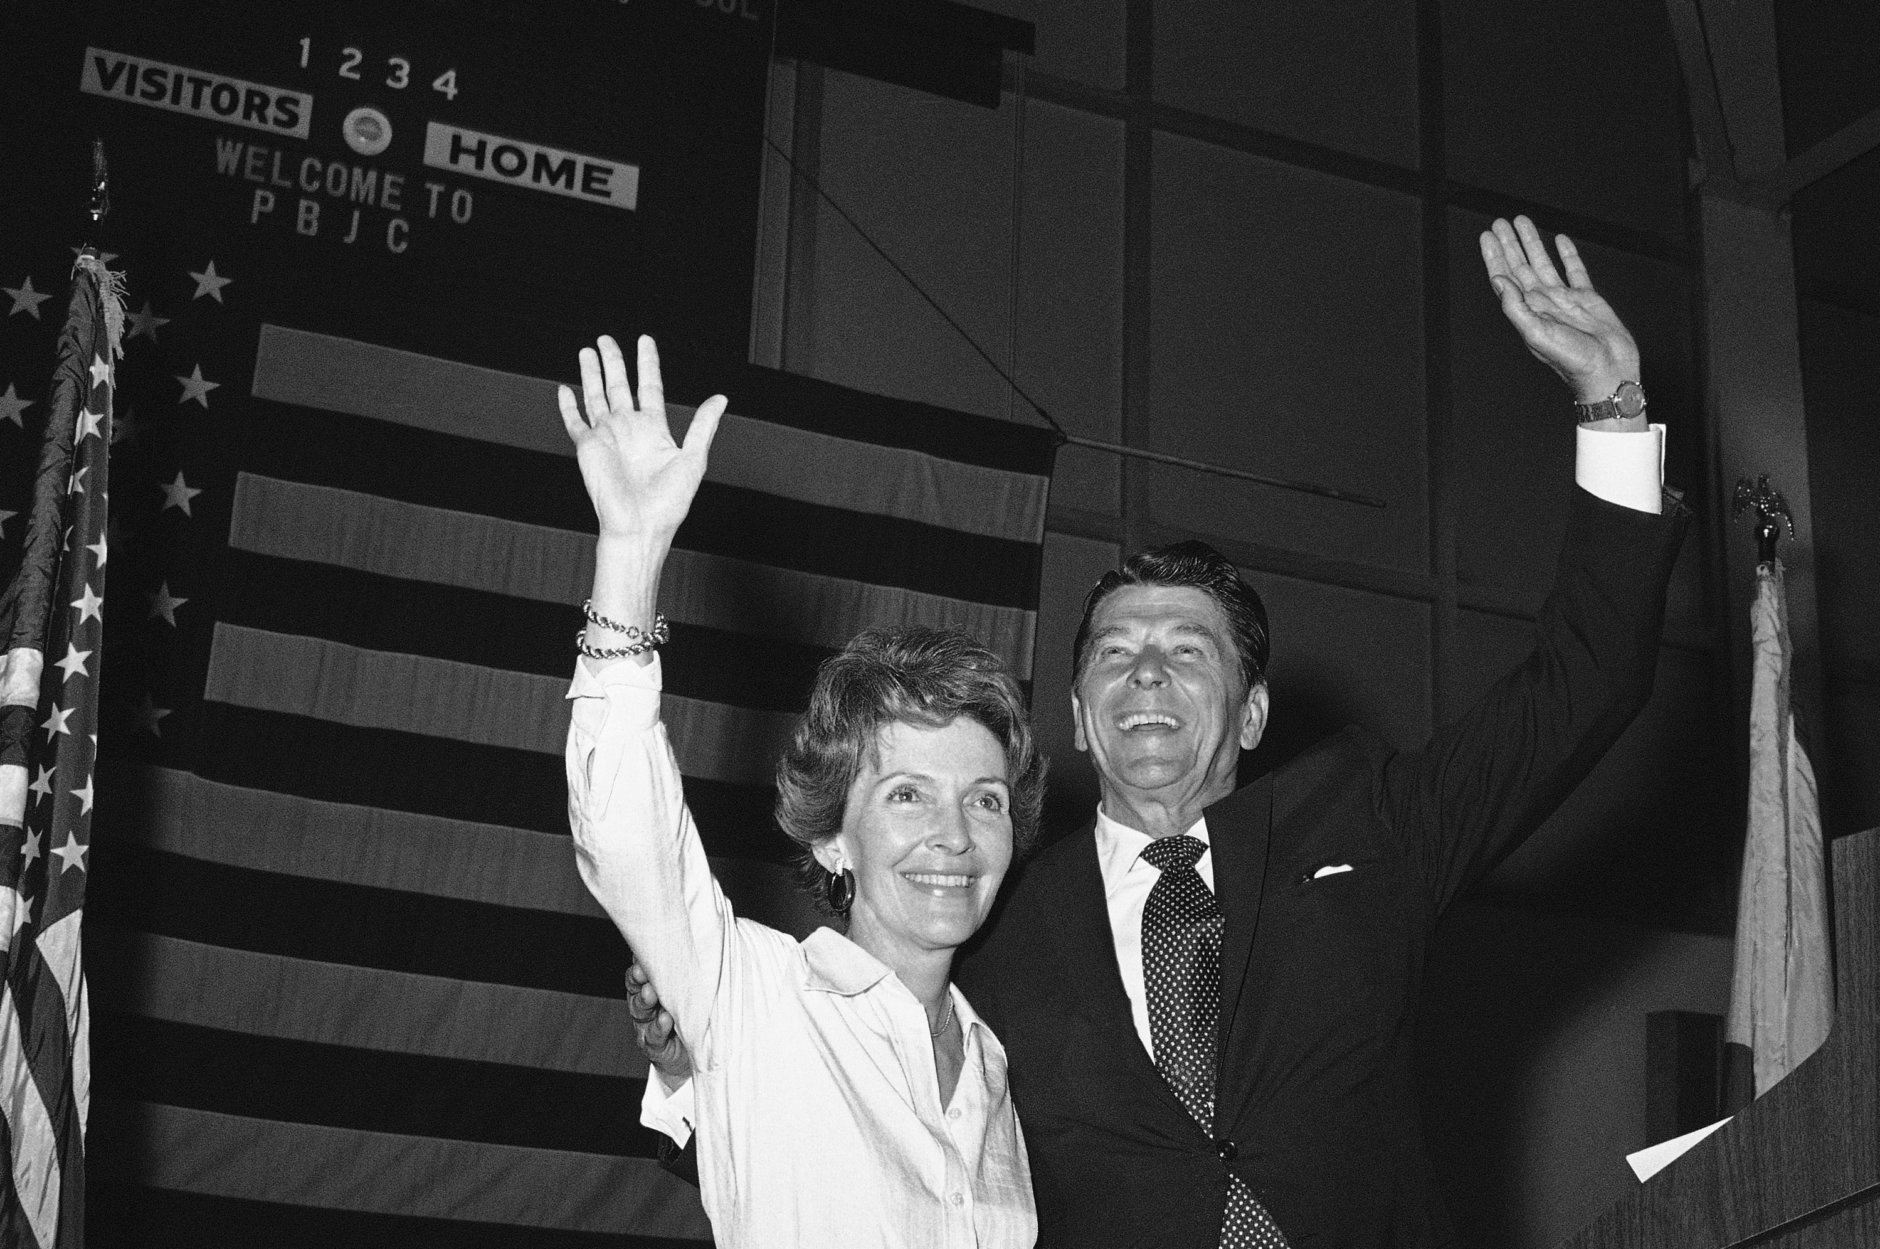 Former California Governor Ronald Reagan, Republican candidate for President, and his wife Nancy, raise their arms in response to loud applause as they stand on the podium, March 8, 1976 in Lake Worth, Fla. The rally for Reagan, was held at the Palm Beach Junior College. (AP Photo/Robert H. Houston)